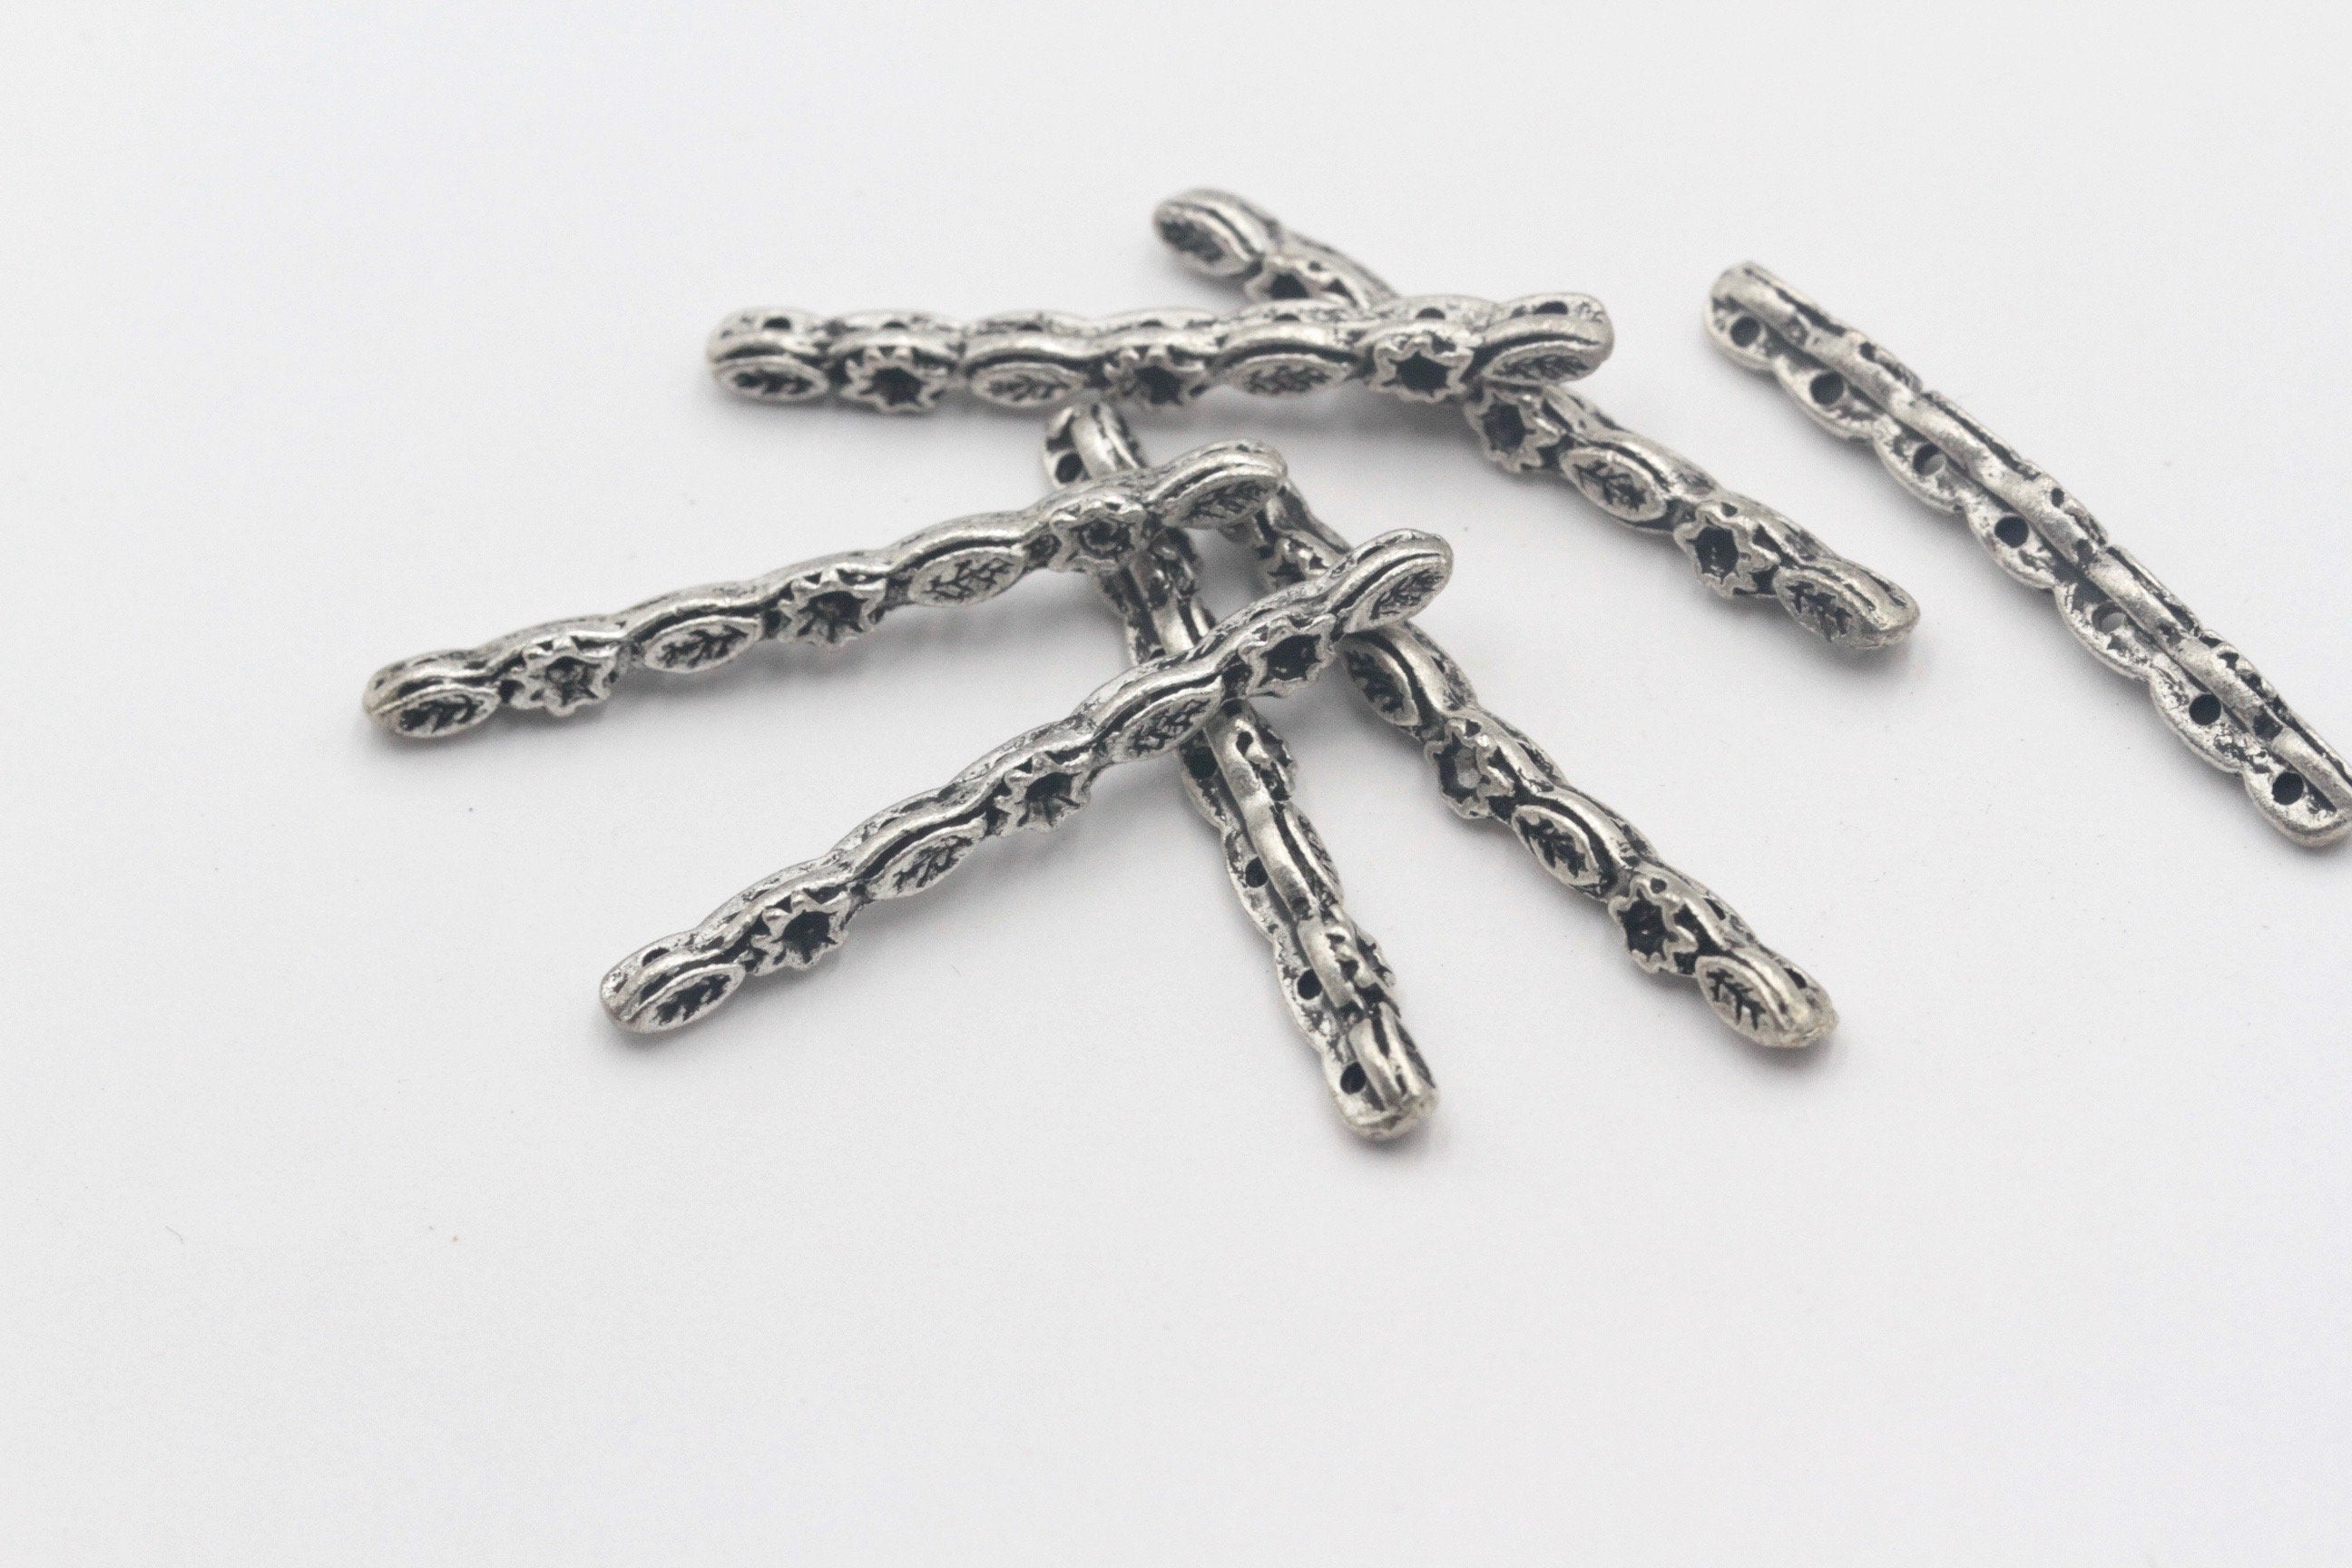 5pcs, 31mm x 3mm, Zinc Based Alloy 7 hole floral link in antiques silver